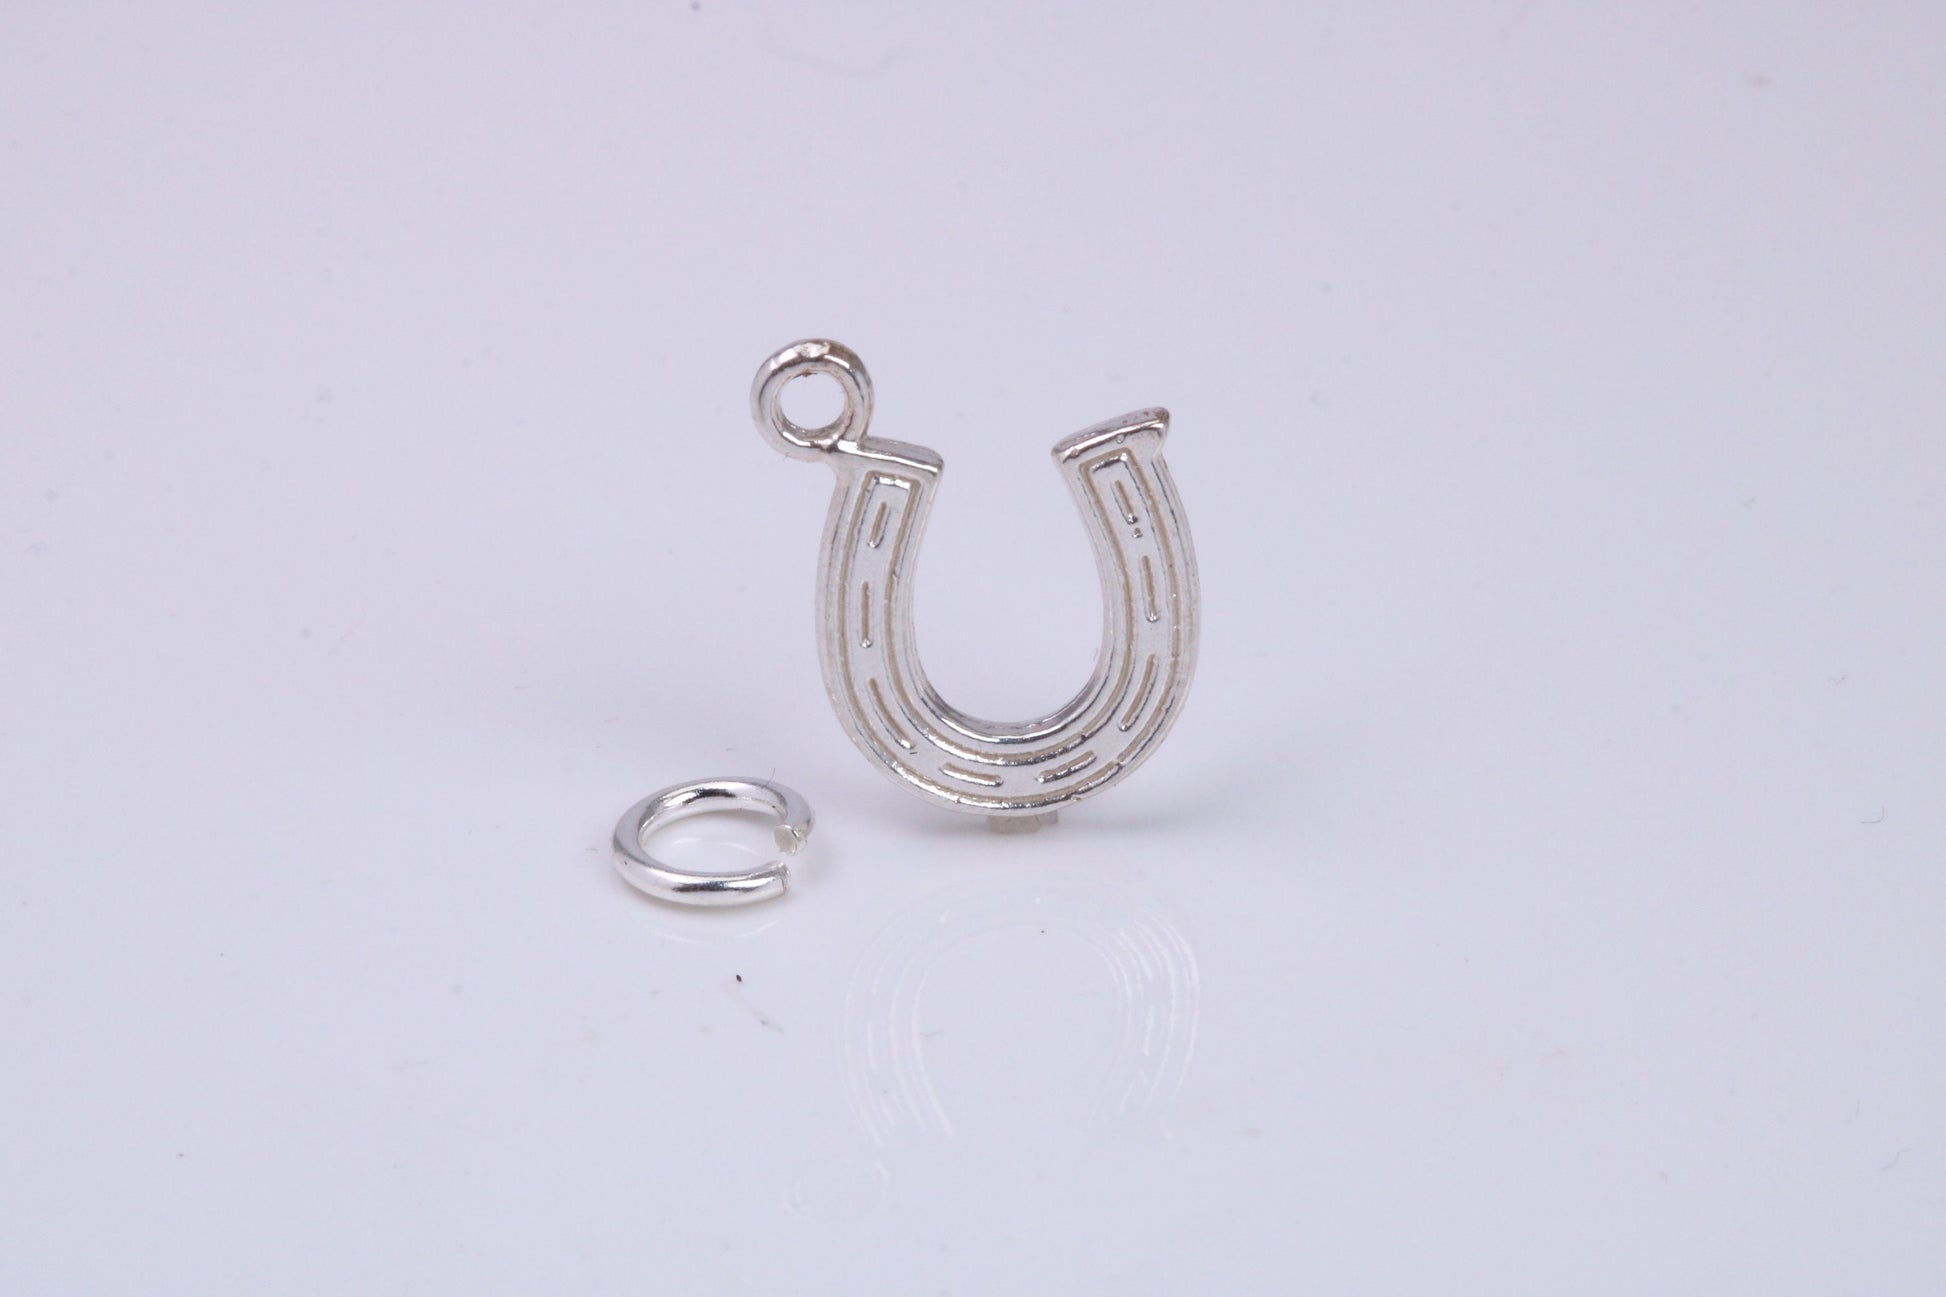 Horse Shoe Charm, Traditional Charm, Made from Solid 925 Grade Sterling Silver, Complete with Attachment Link